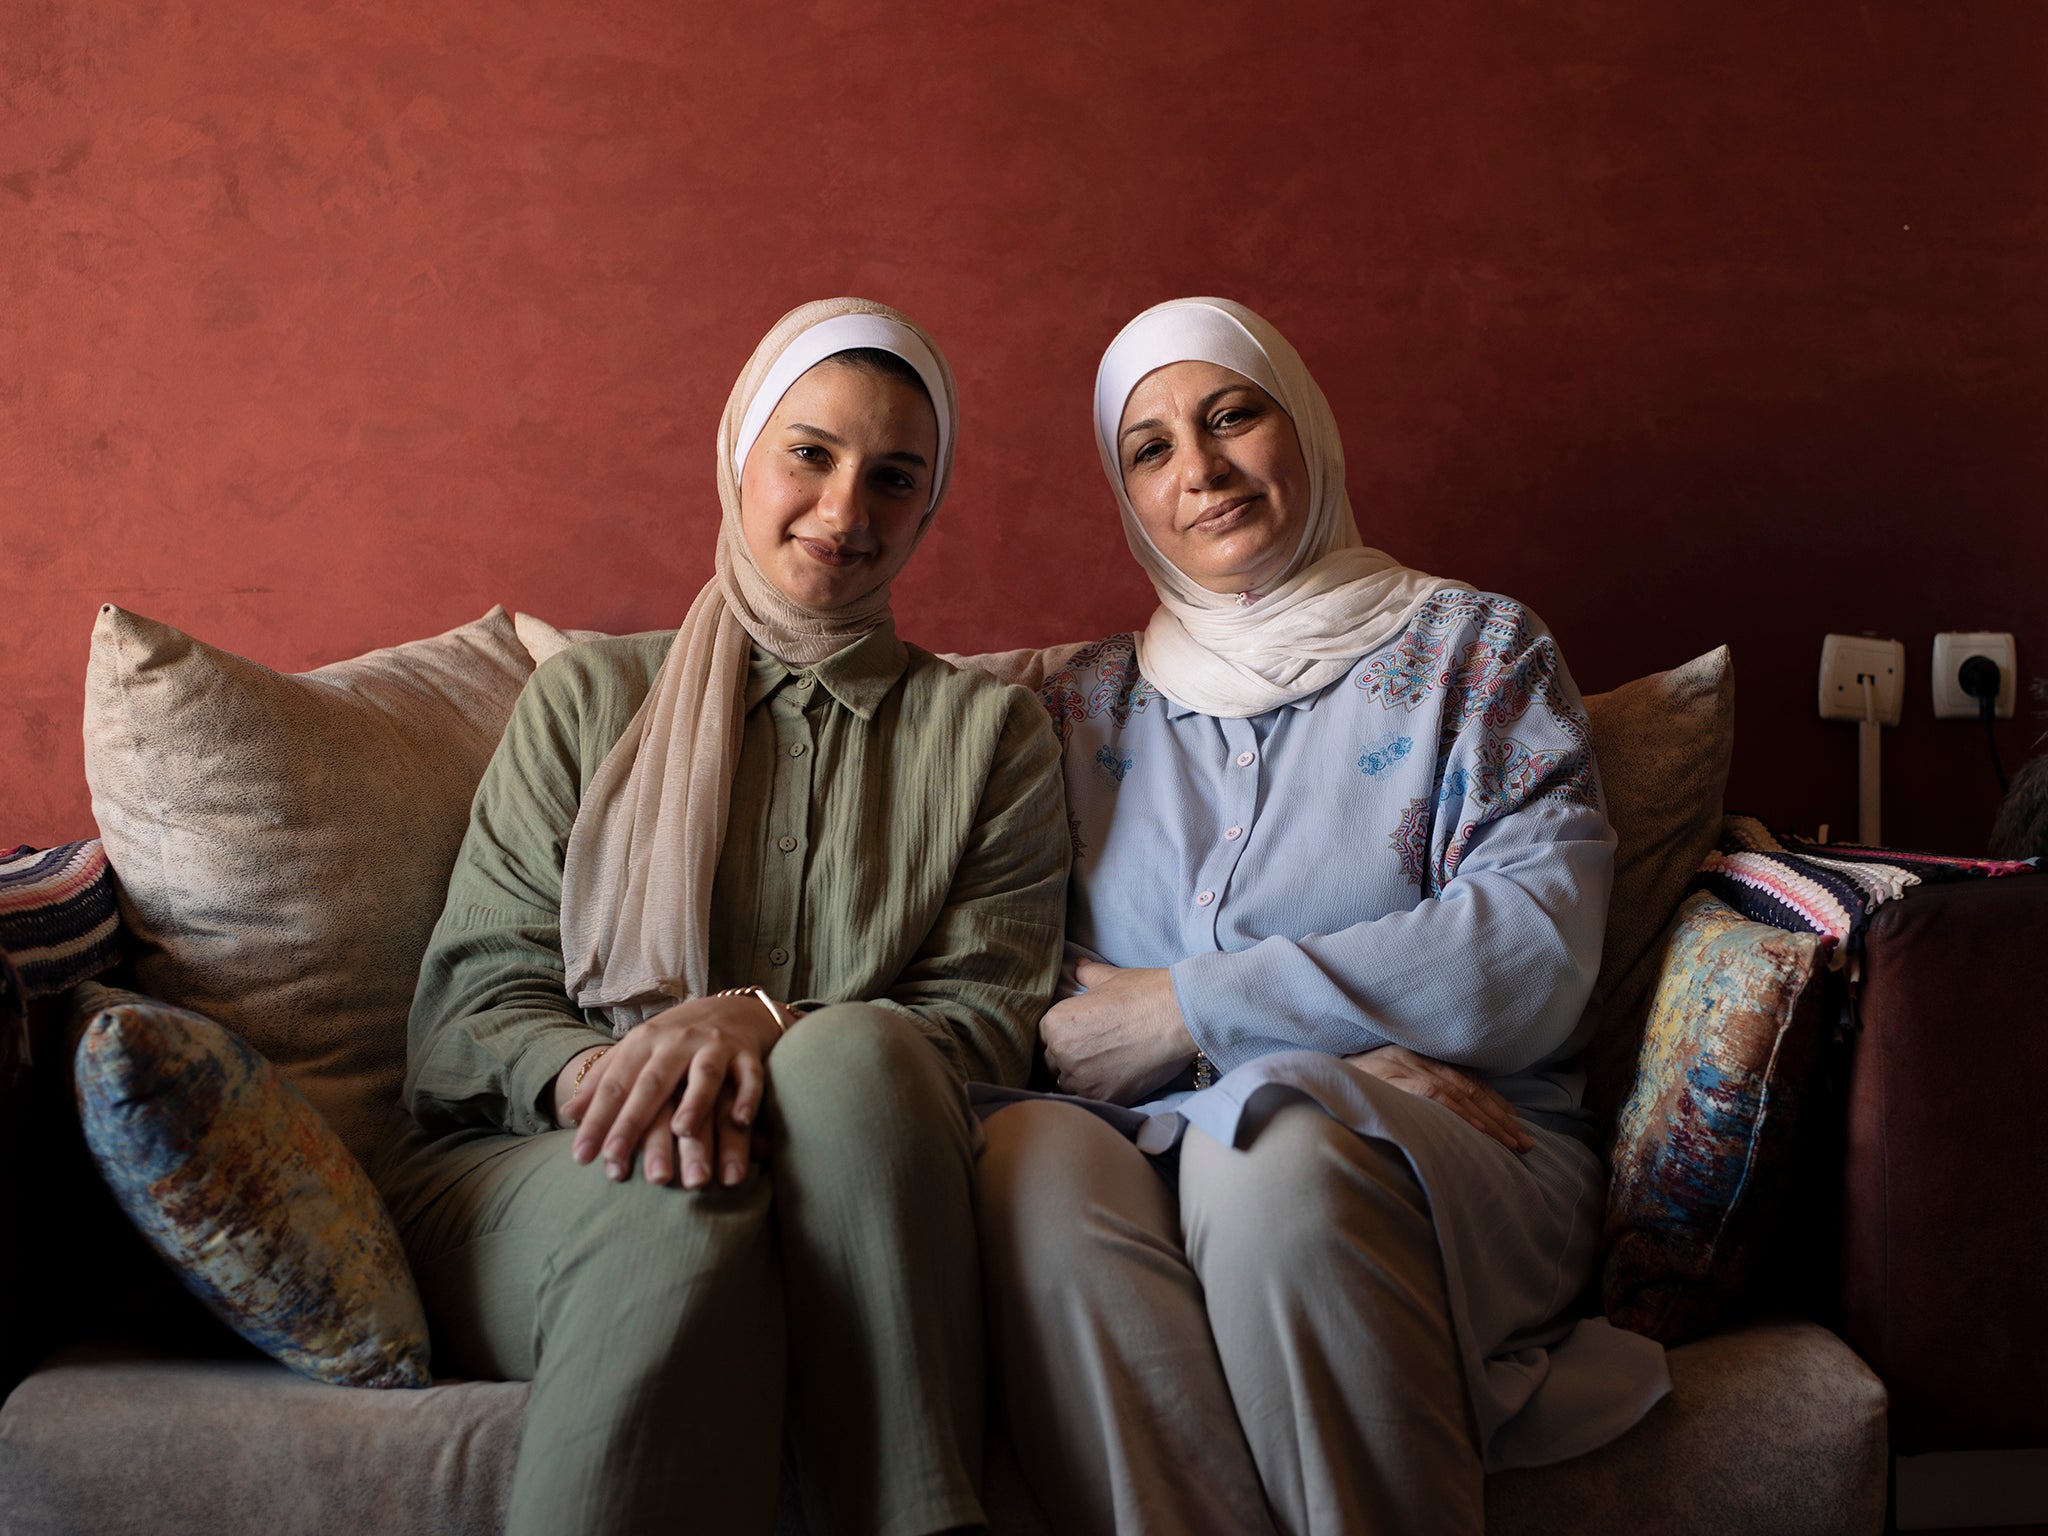 Iman Tayeh, 24, and her mother Raeda, 48, say the past decade has seen significant progress for women